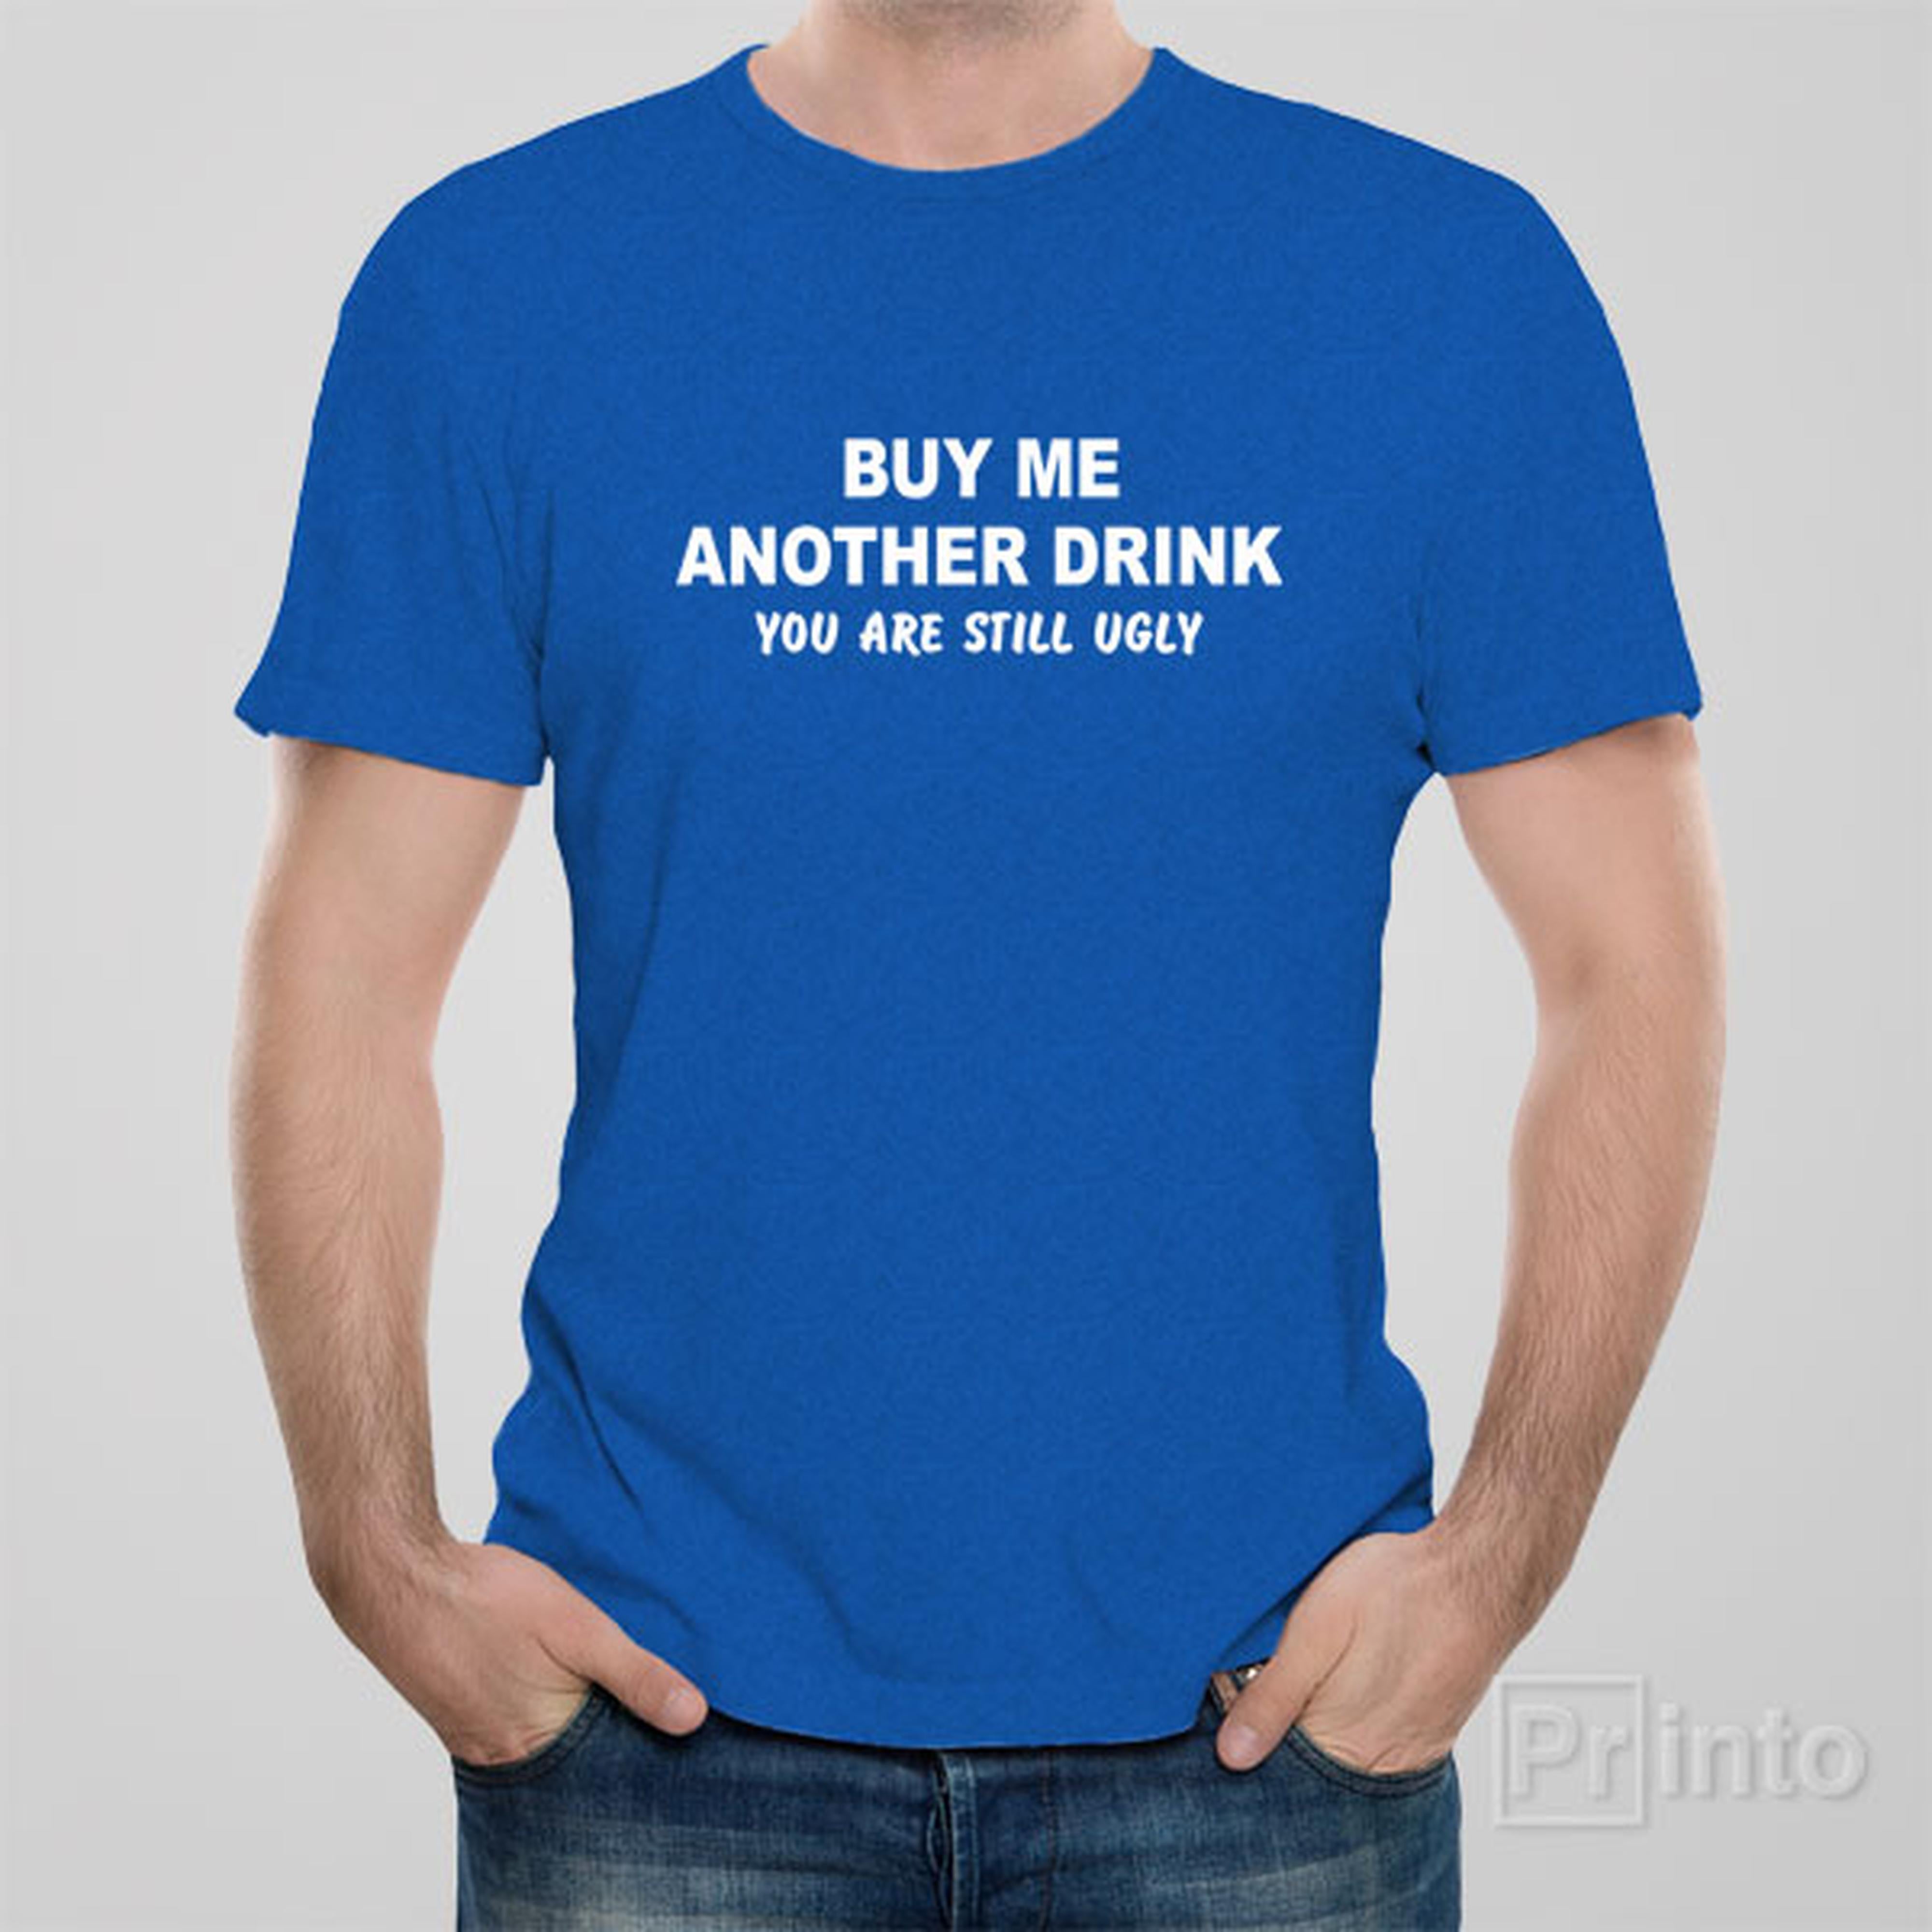 buy-me-another-drink-you-are-still-ugly-t-shirt